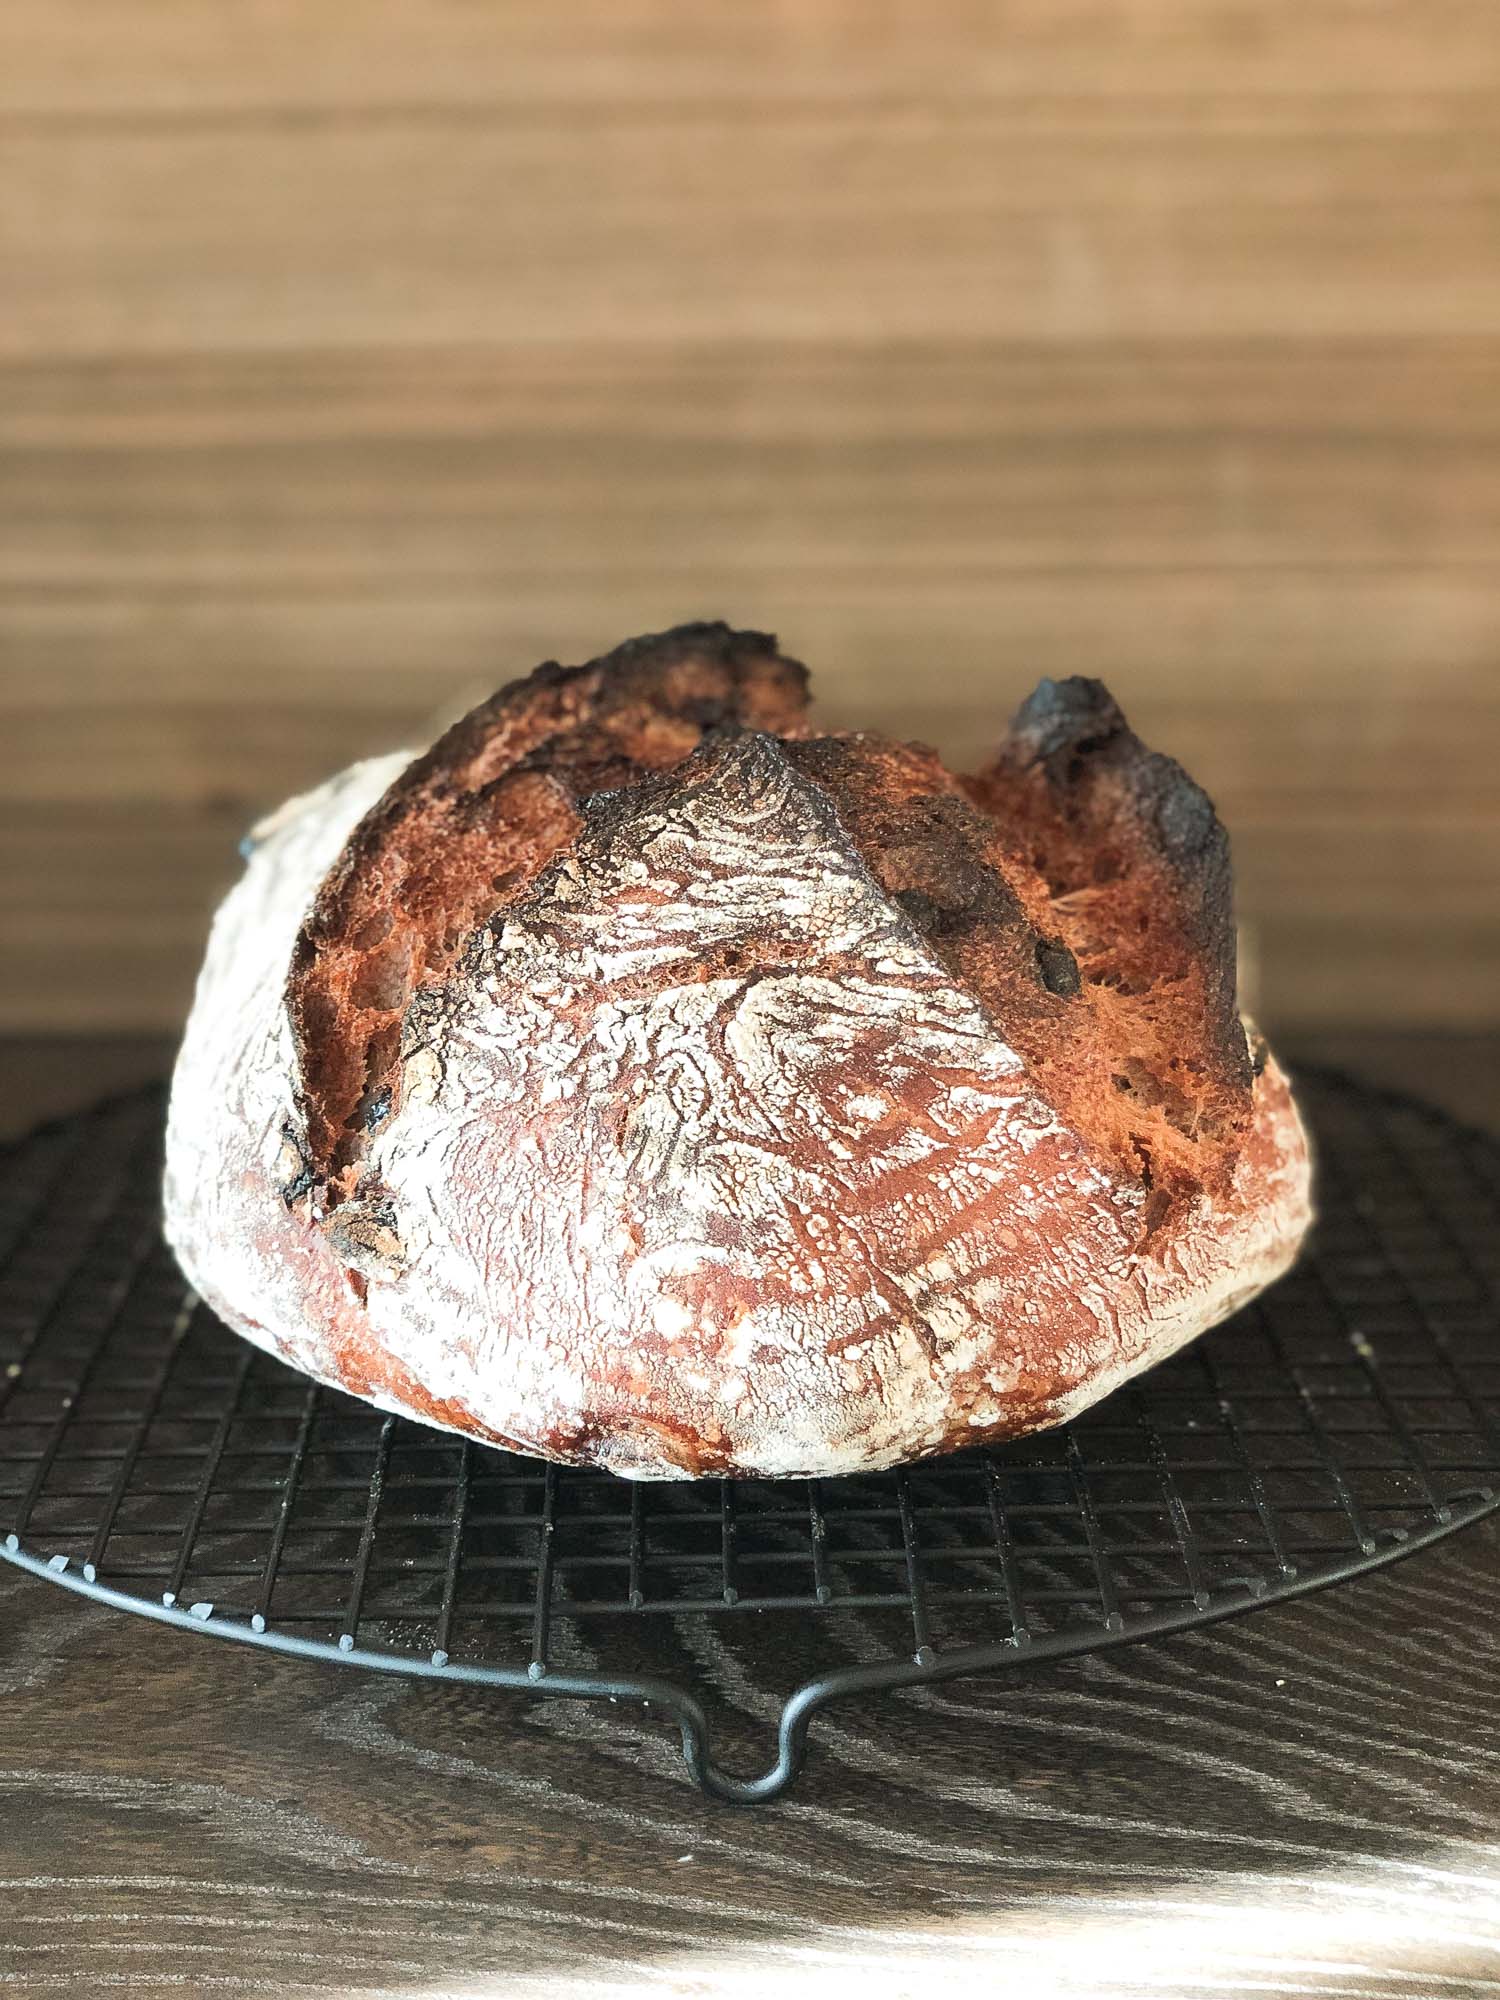 Everything you need to make your own sourdough bread. We ship